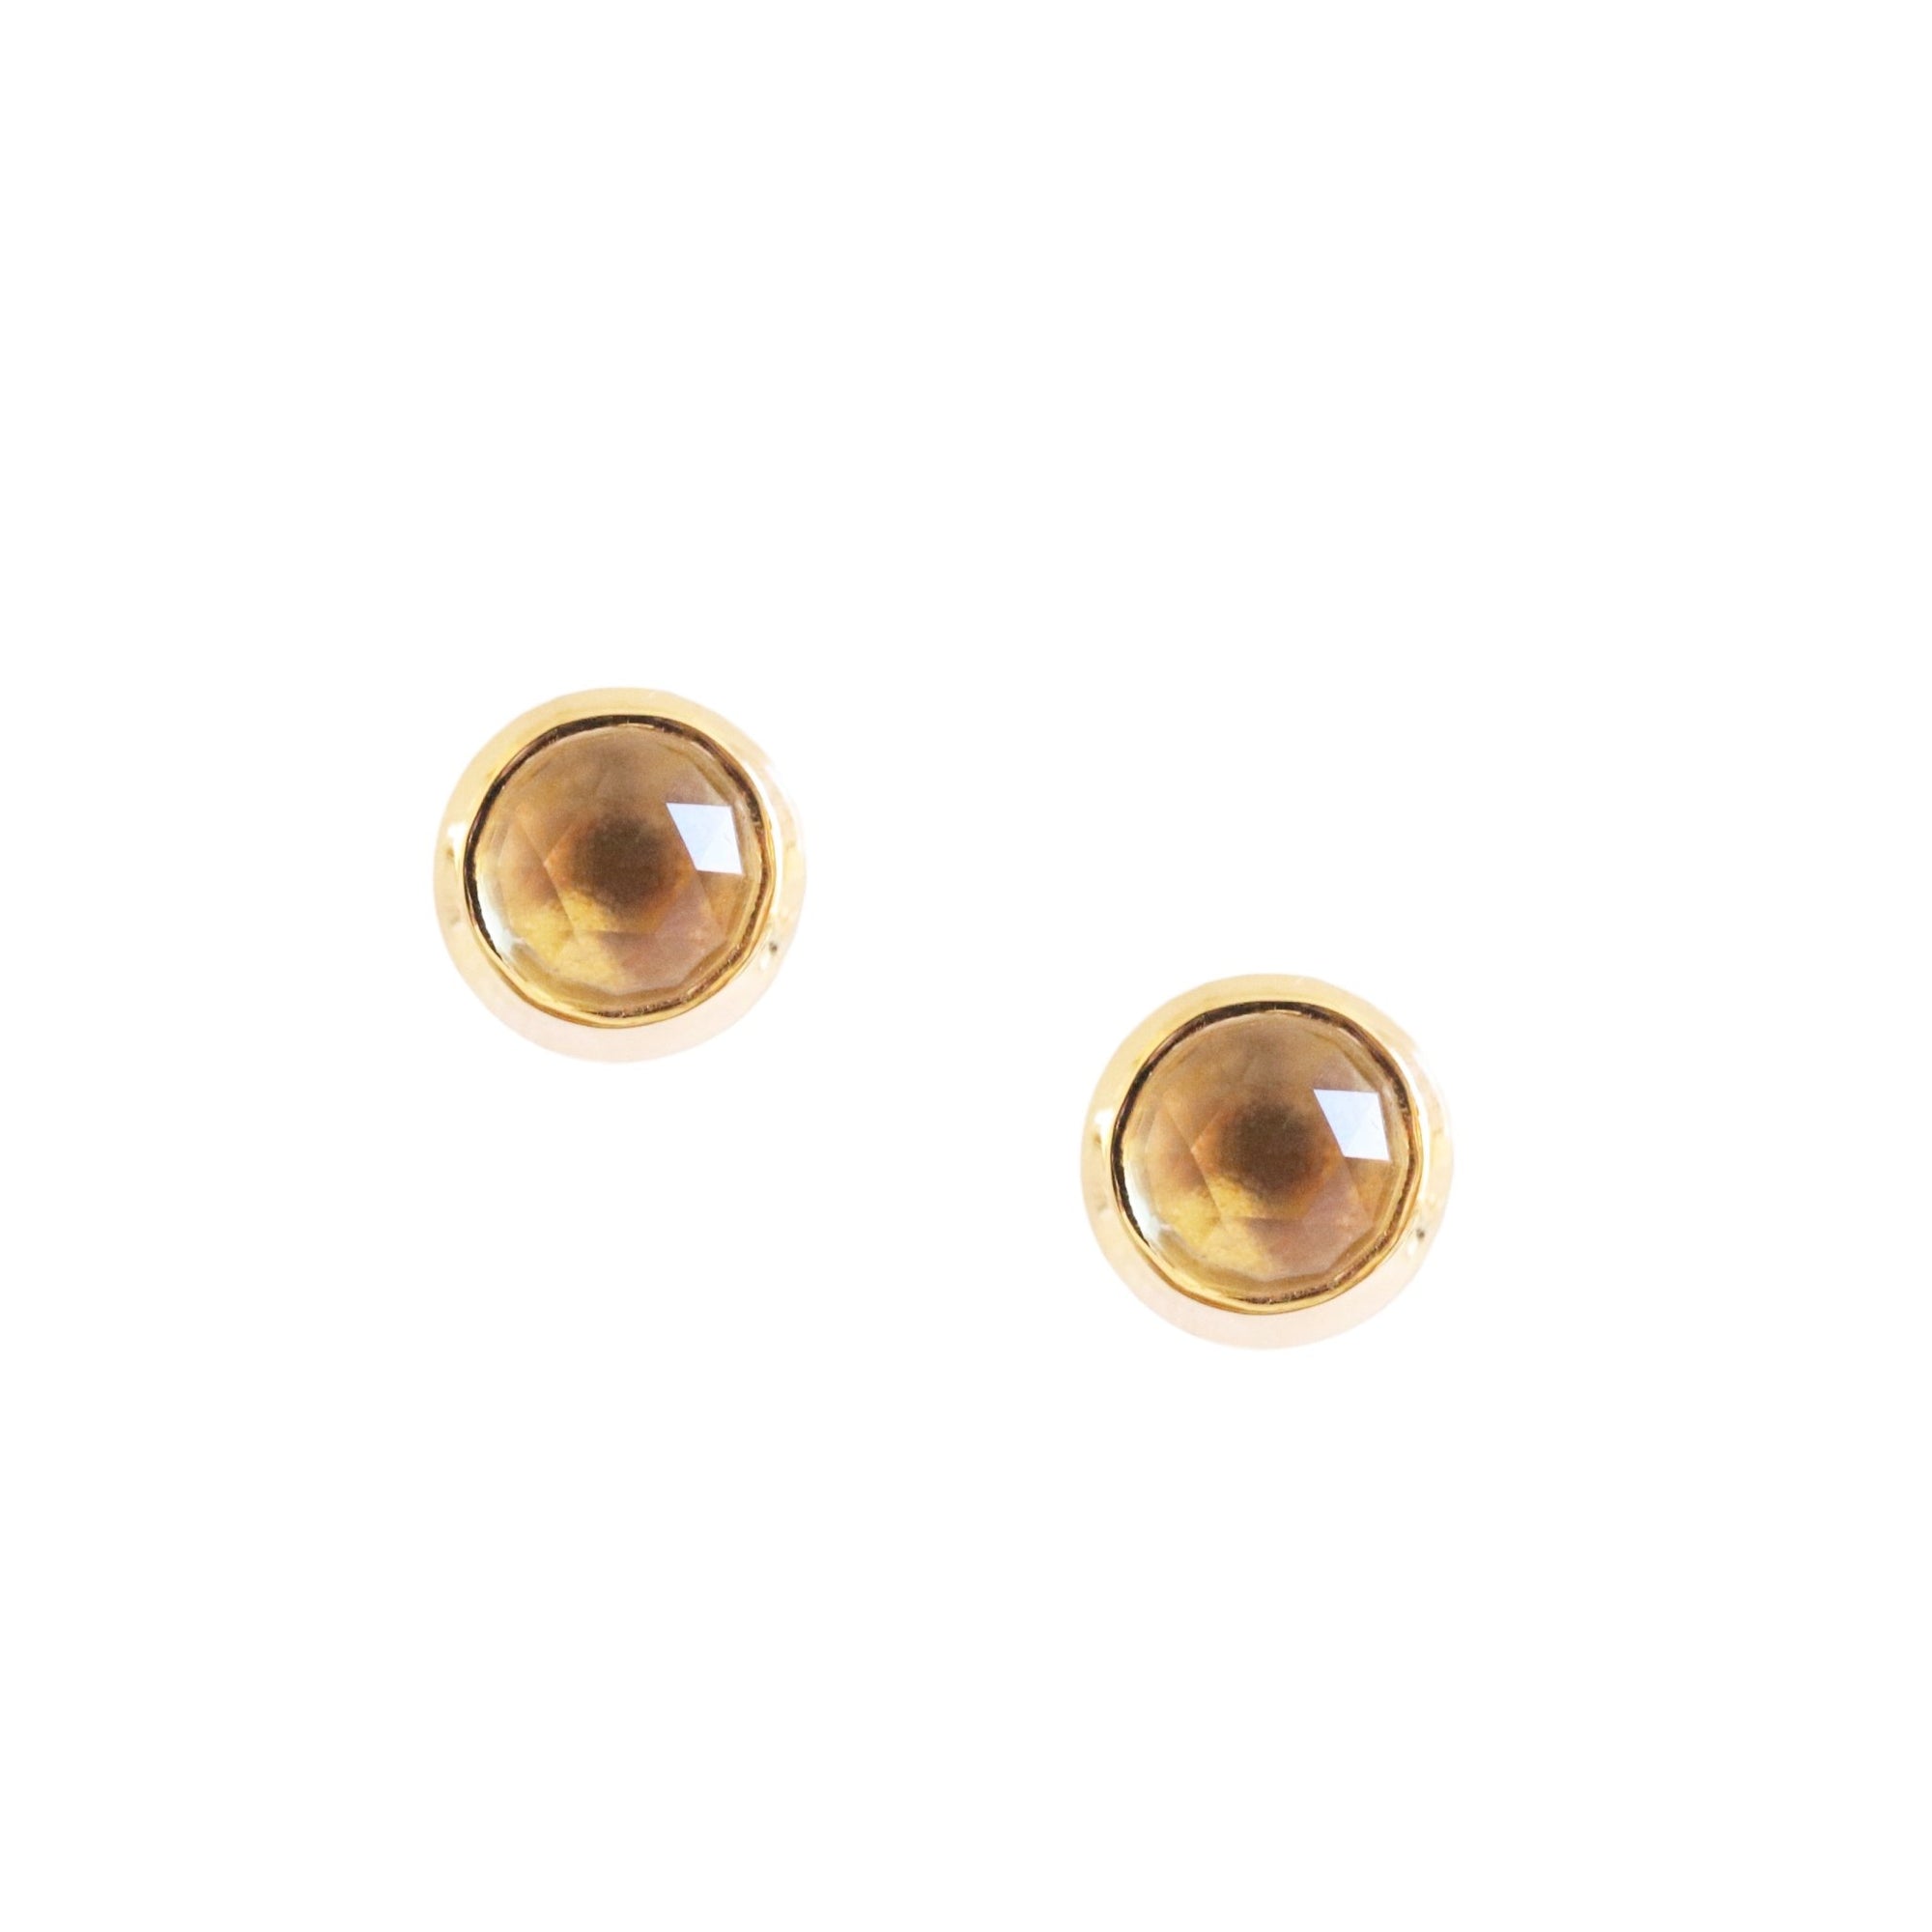 DAINTY LEGACY STUDS - CITRINE & GOLD - SO PRETTY CARA COTTER